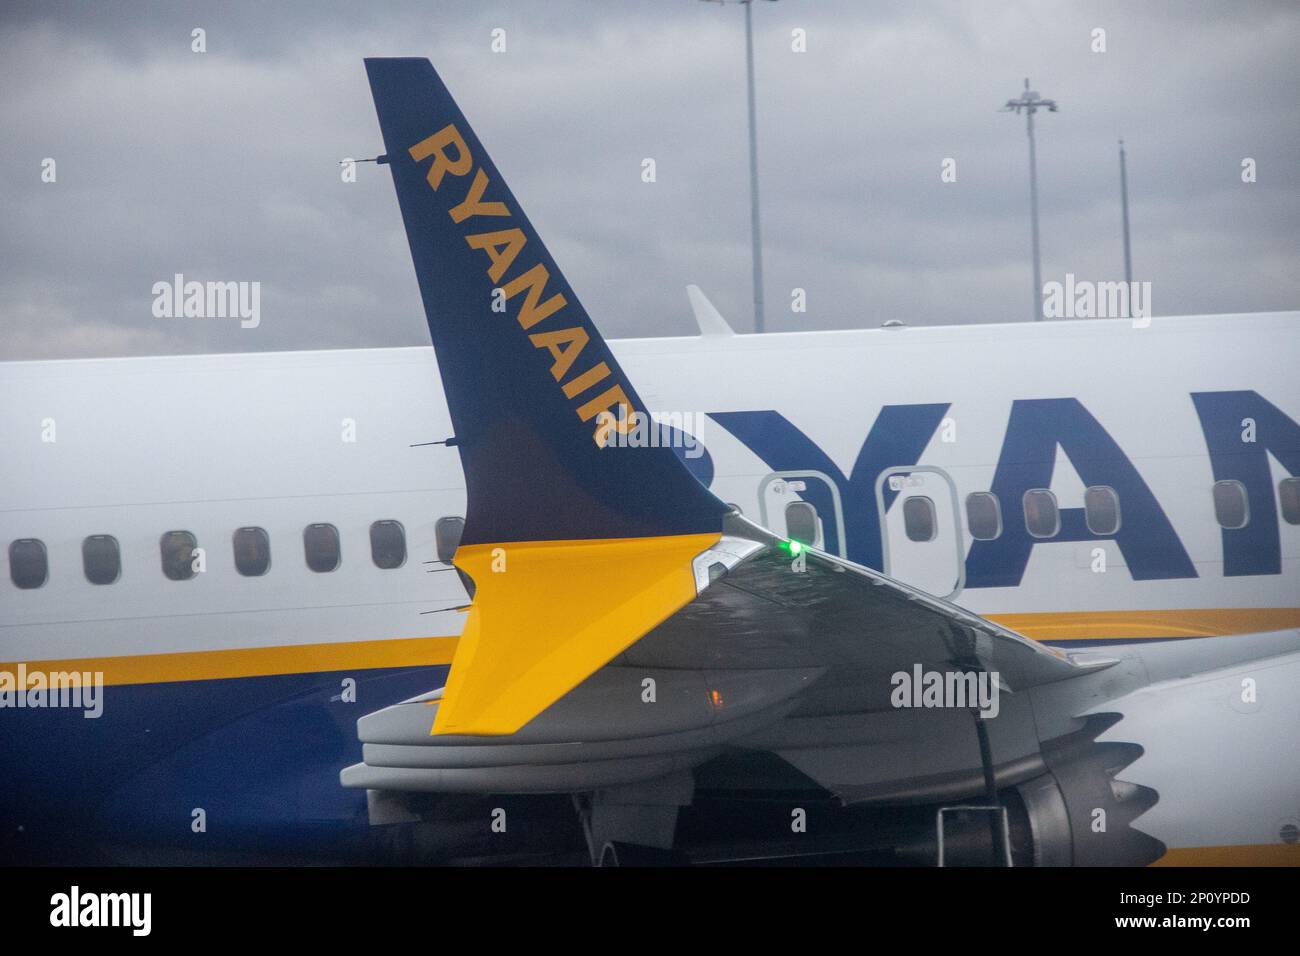 Ryan Air planes at Stansted Airport. Credit: Sinai Noor / Alamy Stock Photo Stock Photo